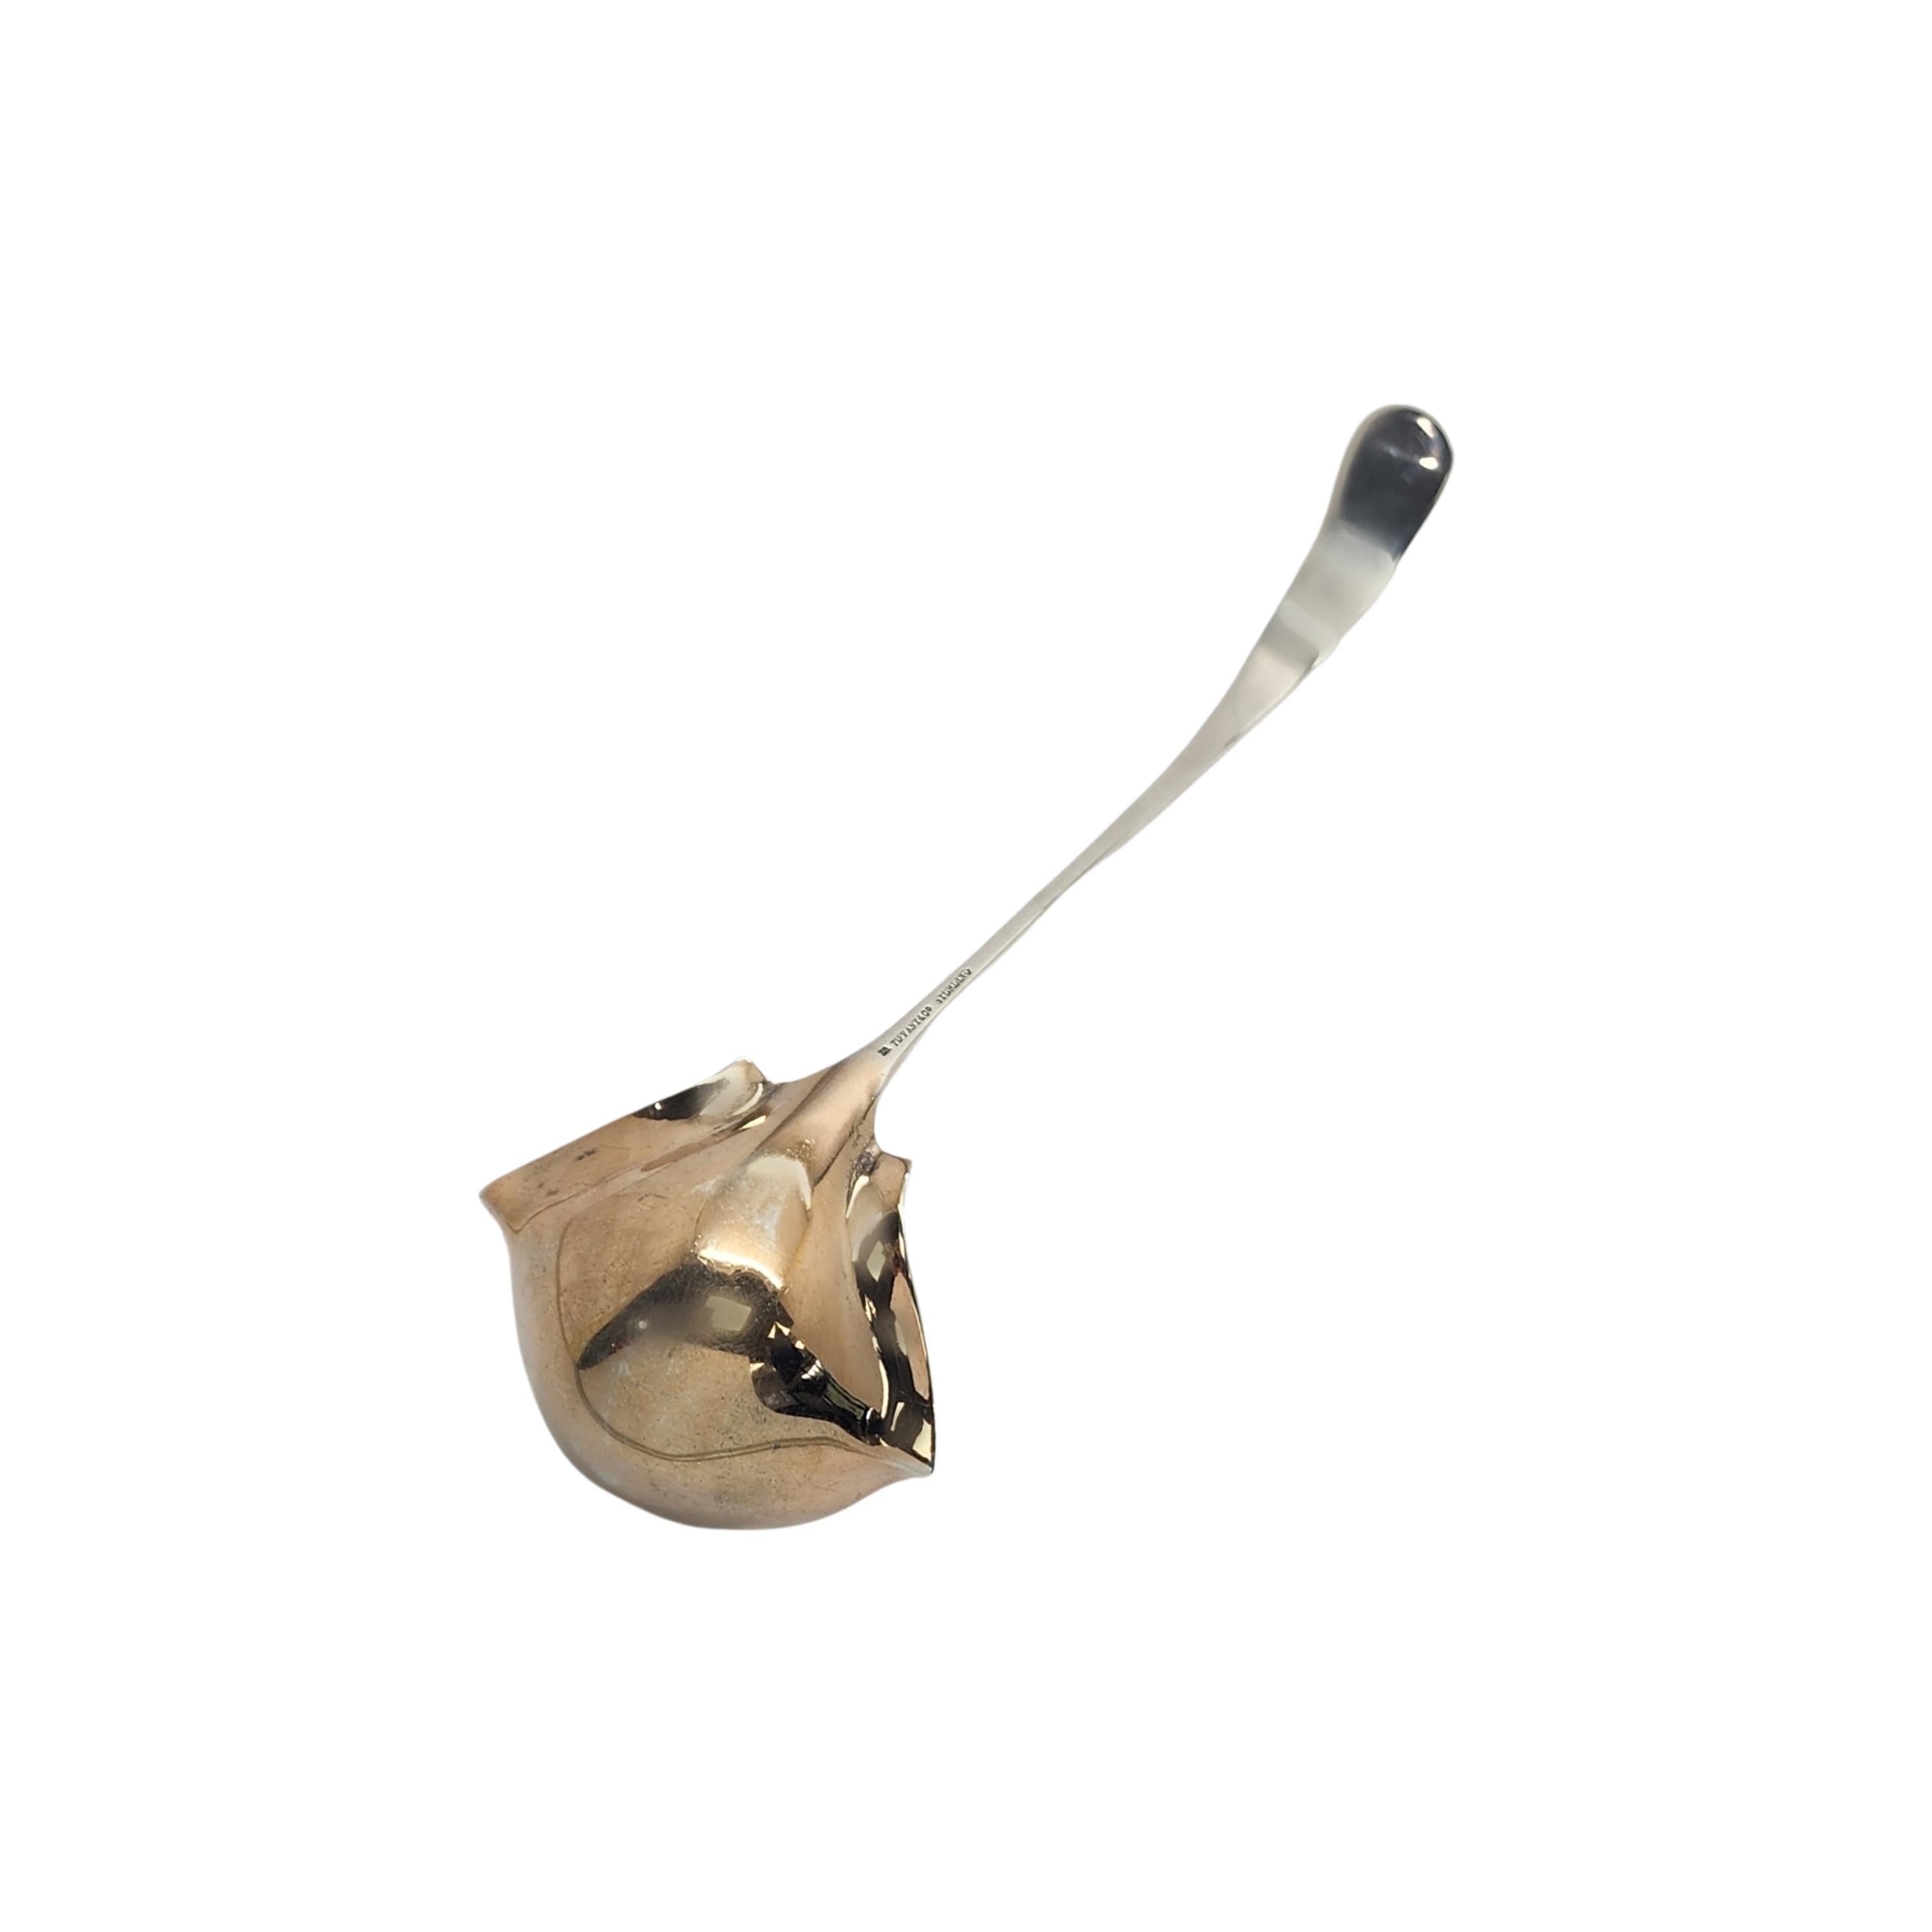 Tiffany & Co sterling silver double lipped cream ladle in the Custom Engraved pattern by Tiffany & Co.

No monogram

Beautifully etched floral design, shovel-like scoop with gold wash bowl. Does not include Tiffany pouch and box. 

Measures approx 7